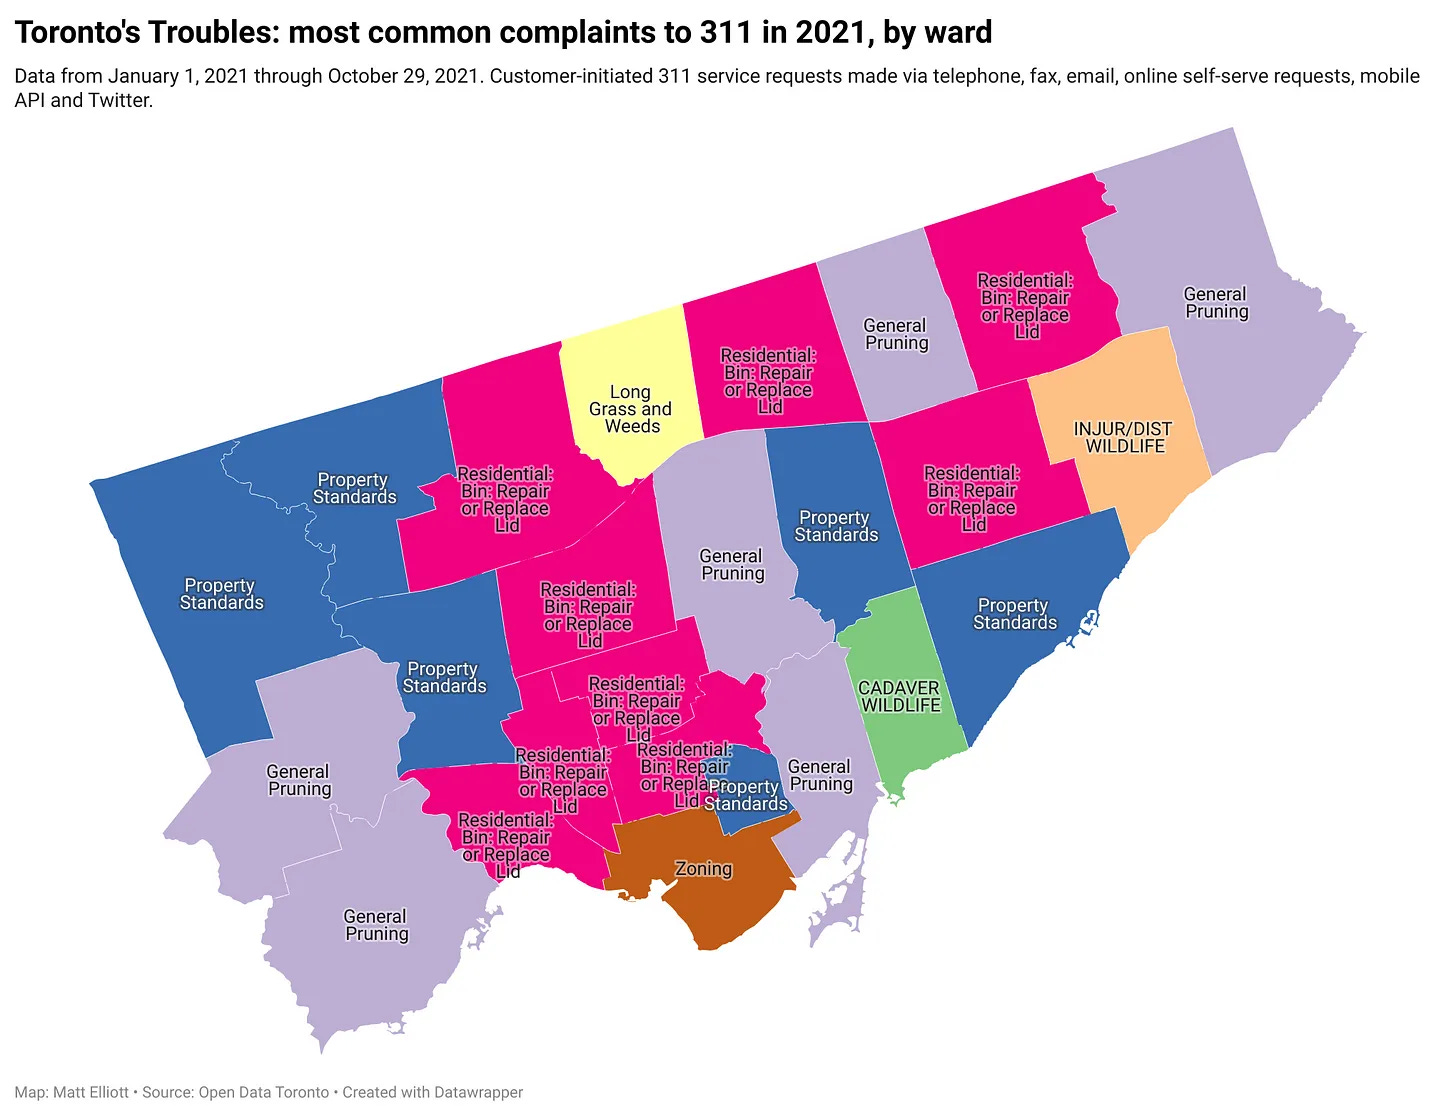 A map showing the top 311 complaint by ward